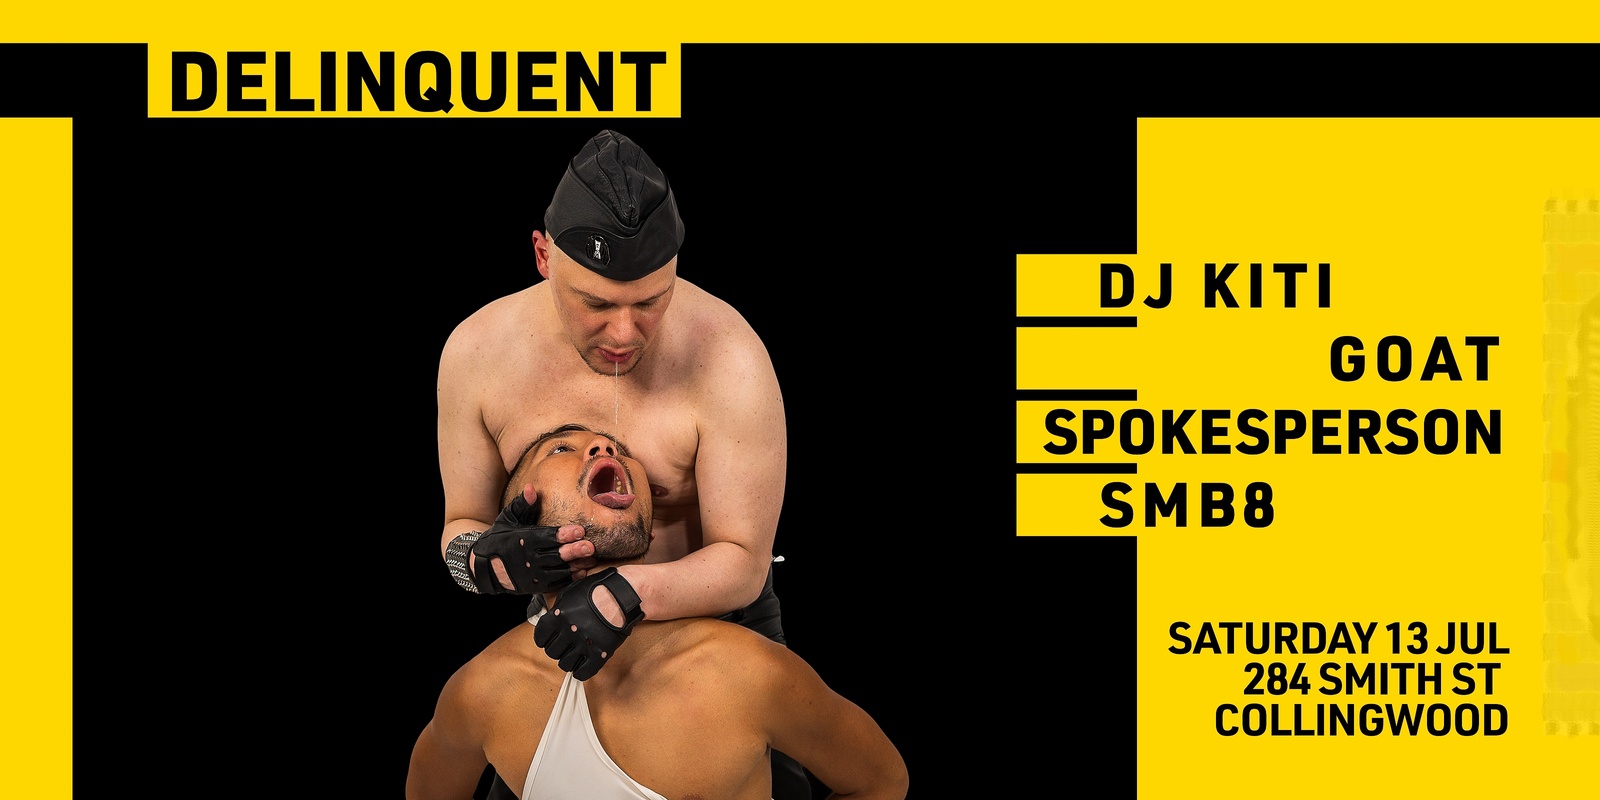 Banner image for DELINQUENT III: Saturday 13 July 2024 ft. DJ Kitty, SMB8 & Goat Spokesperson